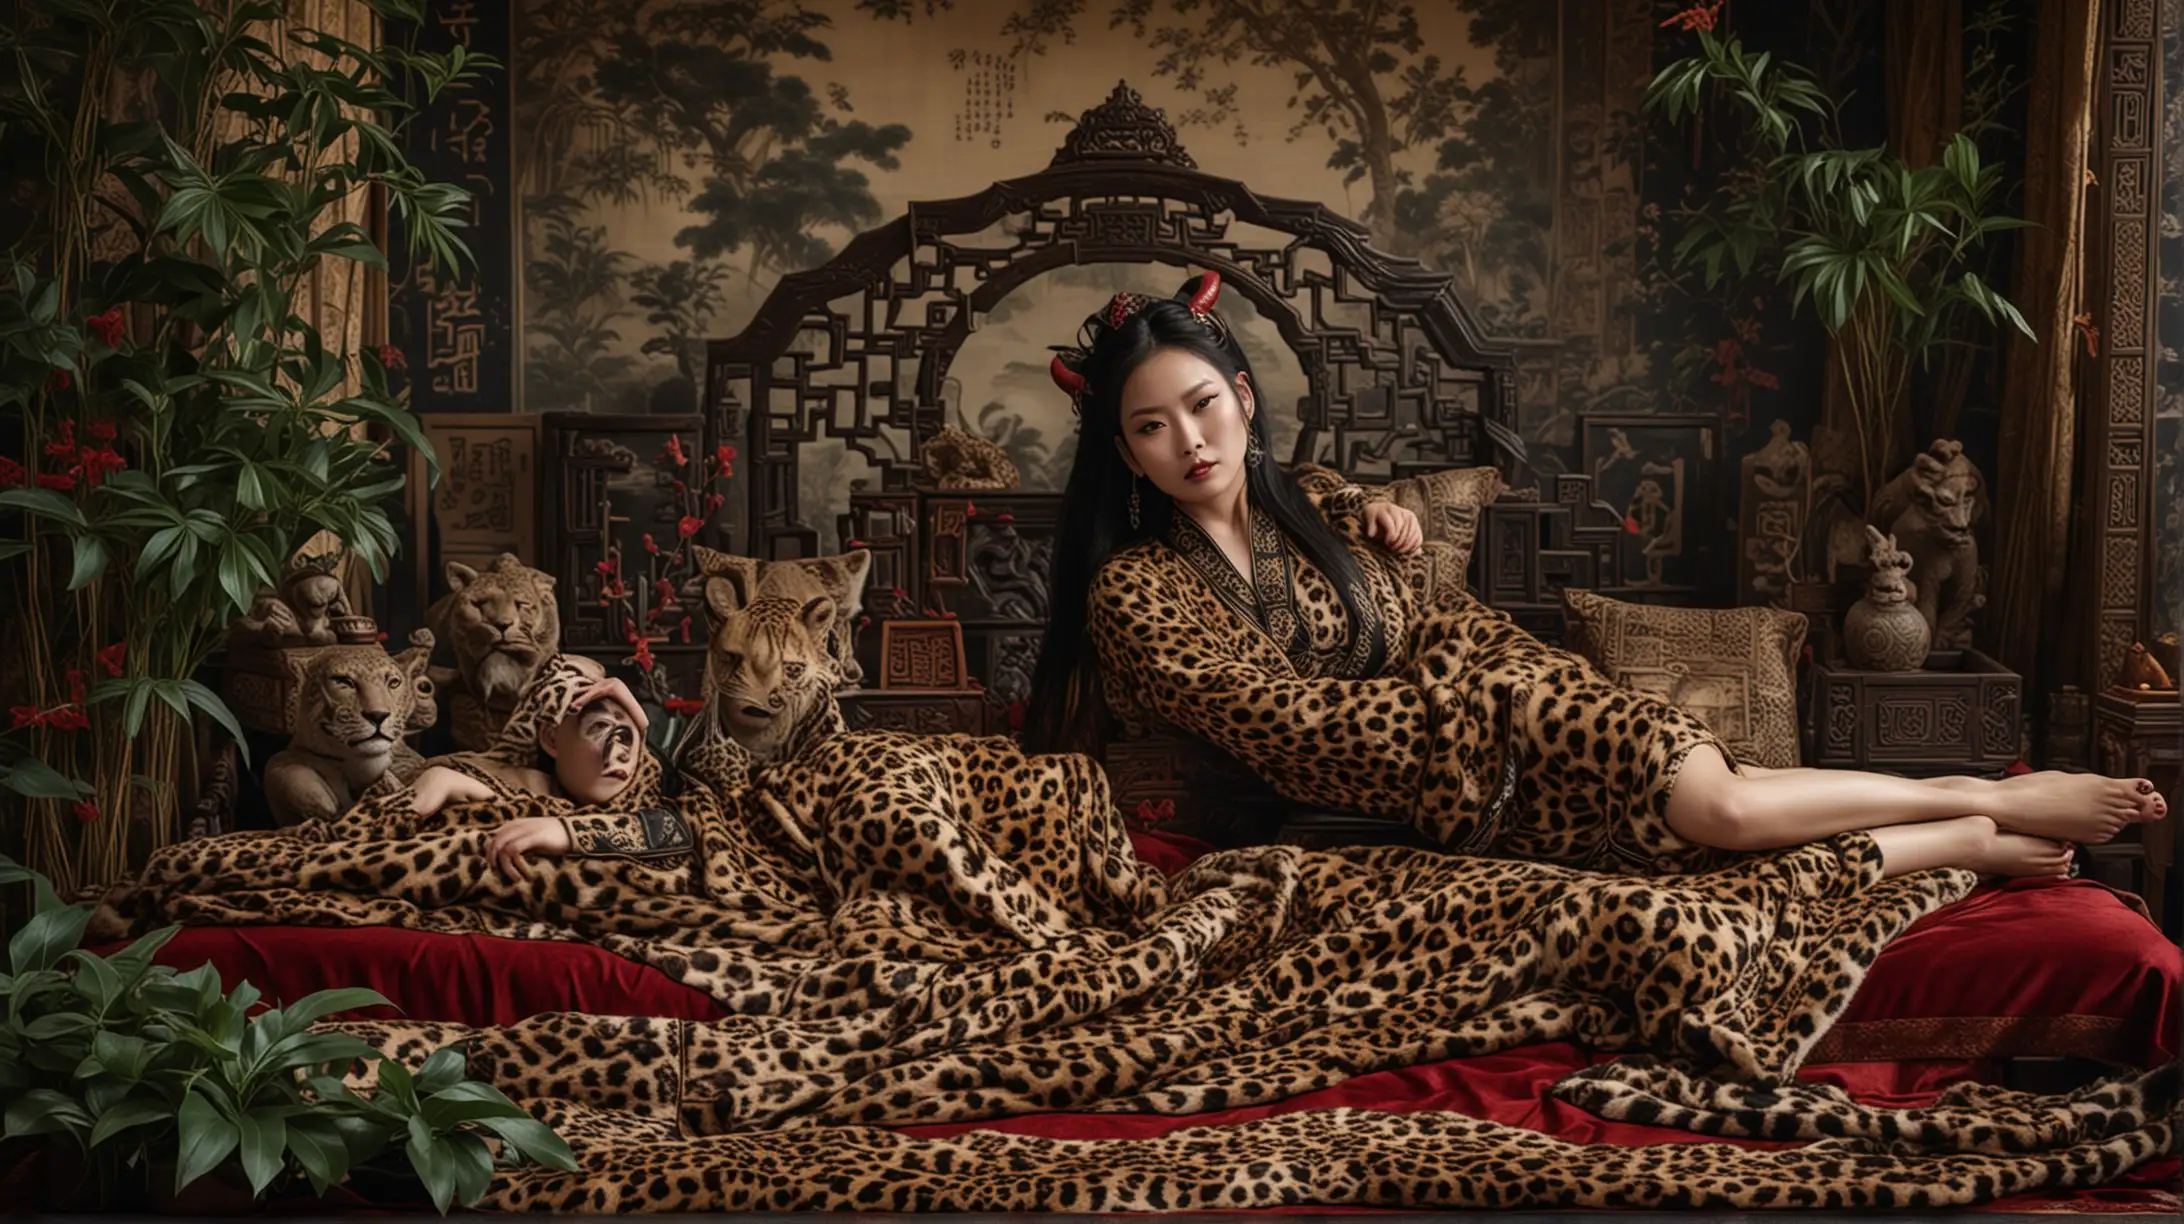 photo image of a sensual Chinese devil woman, reclining on a bed of leopard skins,  surrounded with screens printed with foliage and occult symbols